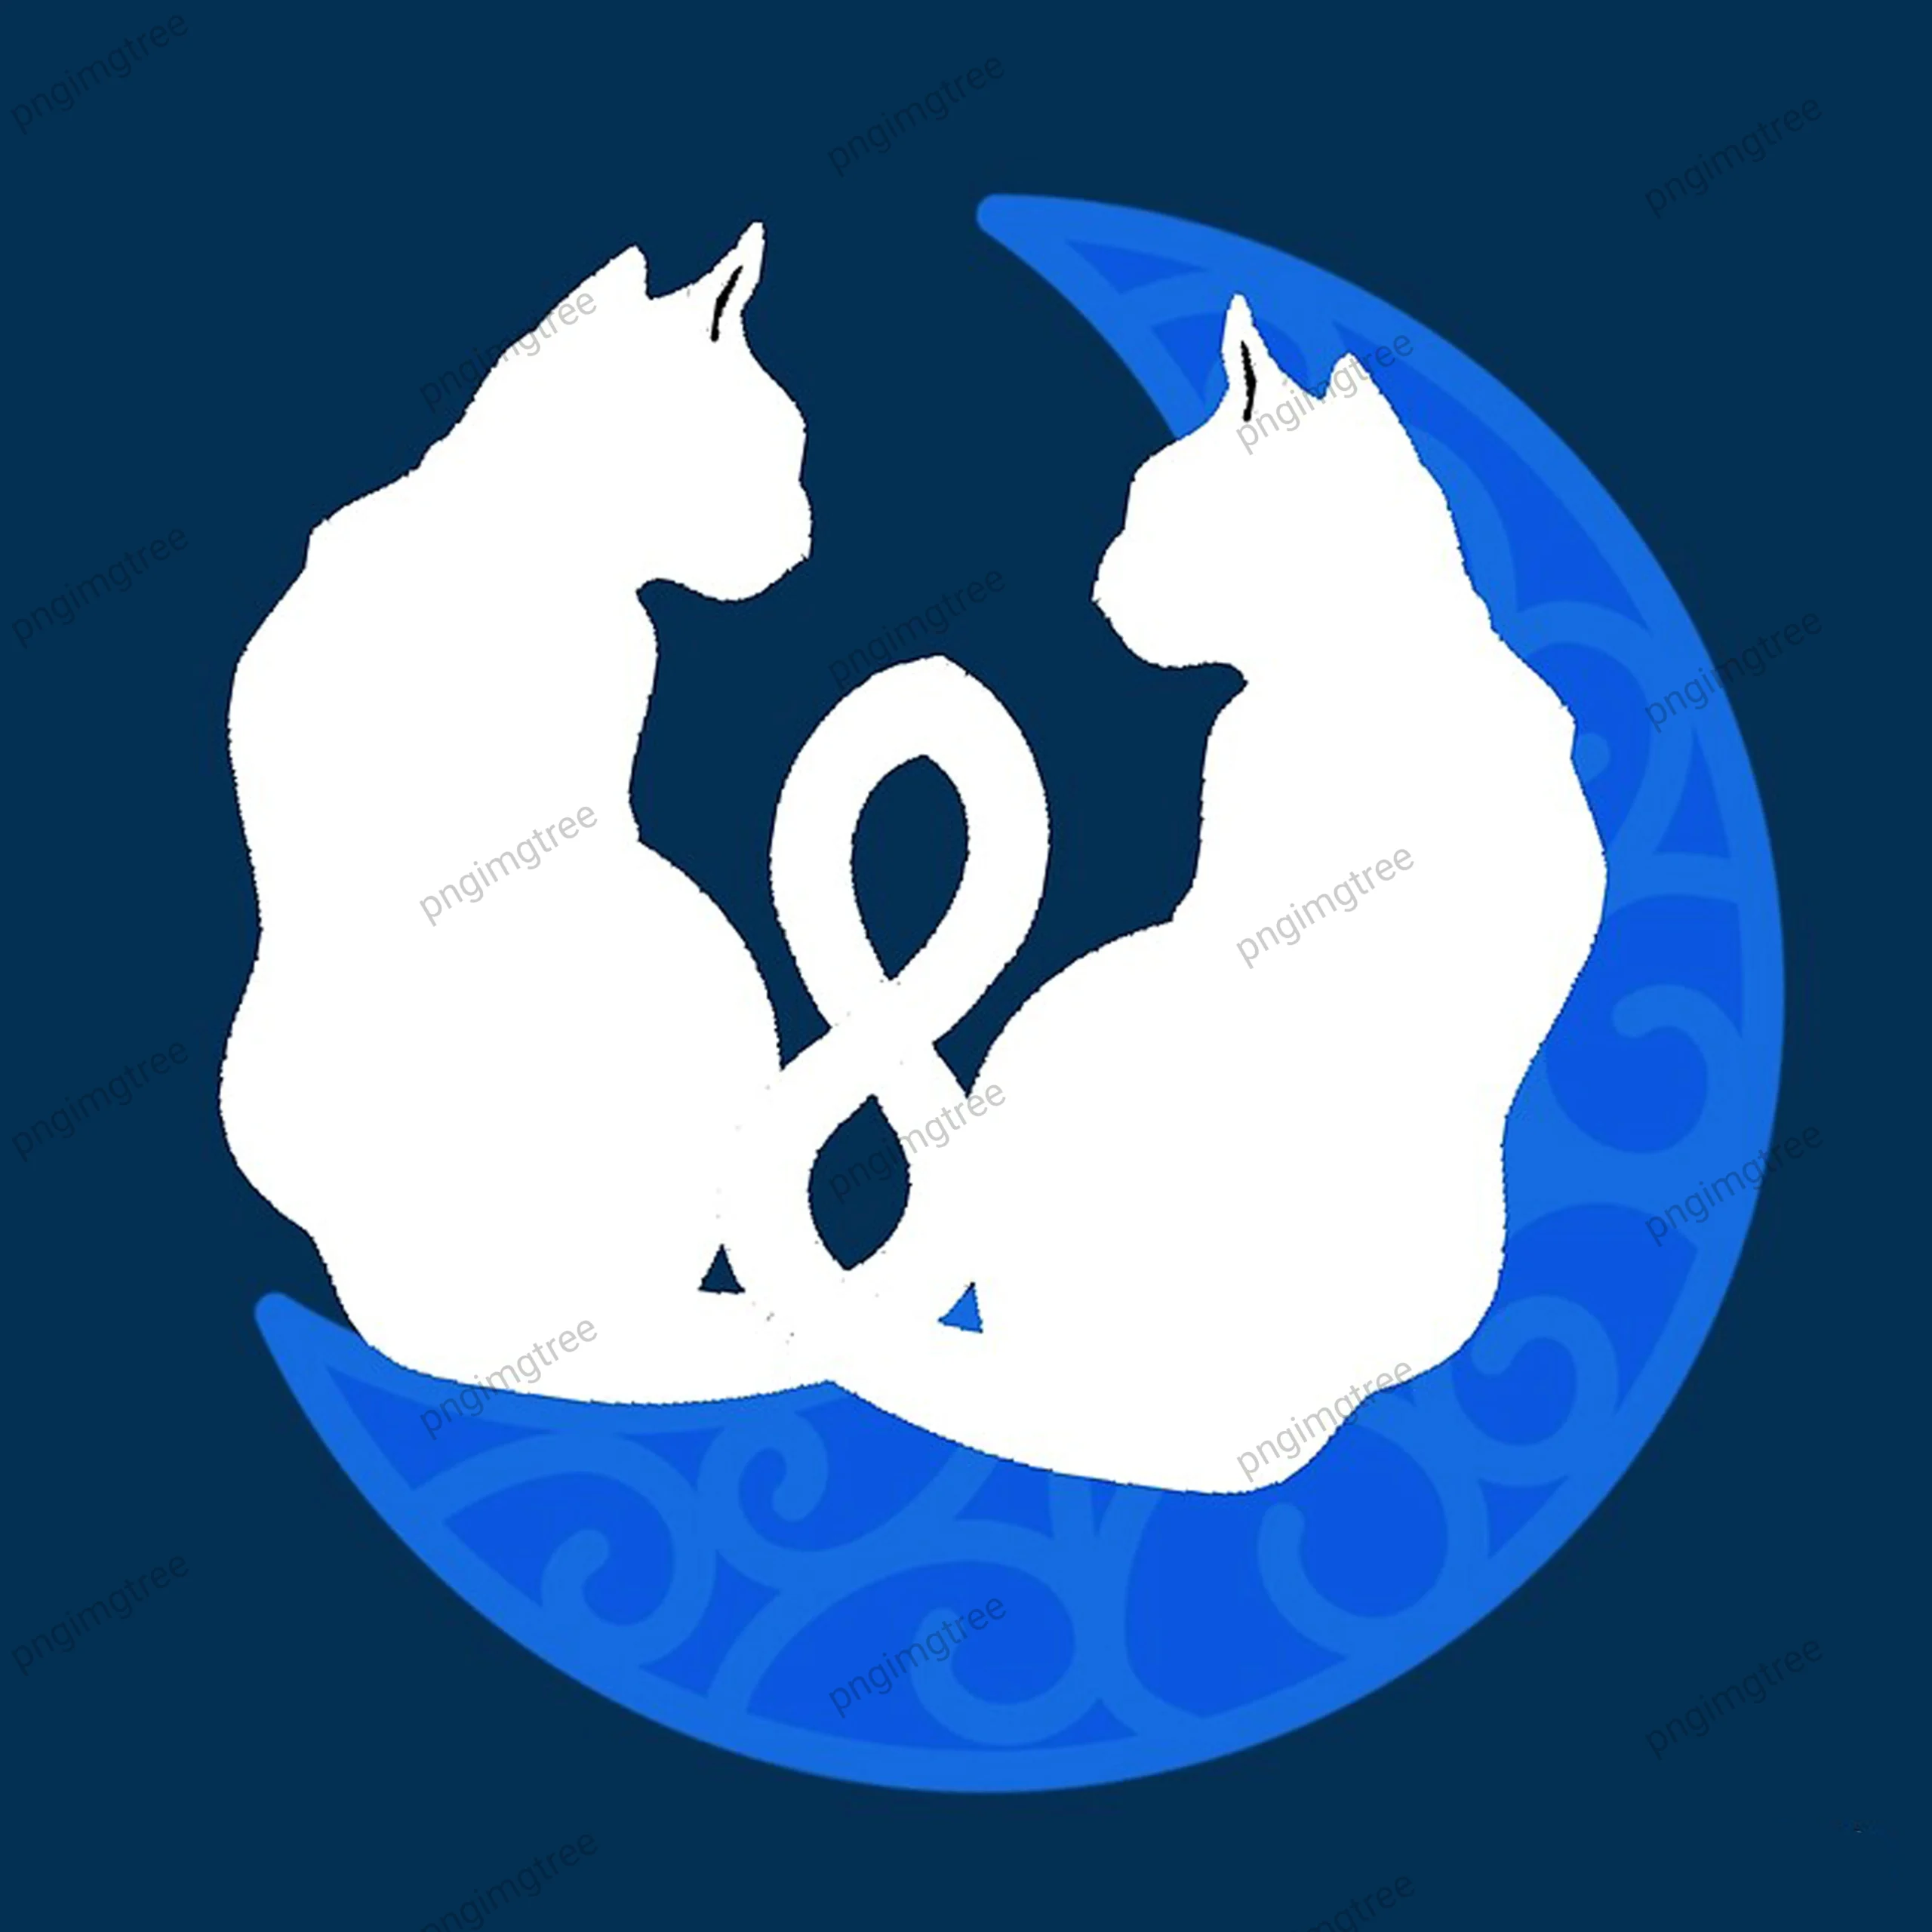 Charming illustration:2 Cats on the blue crescent moon